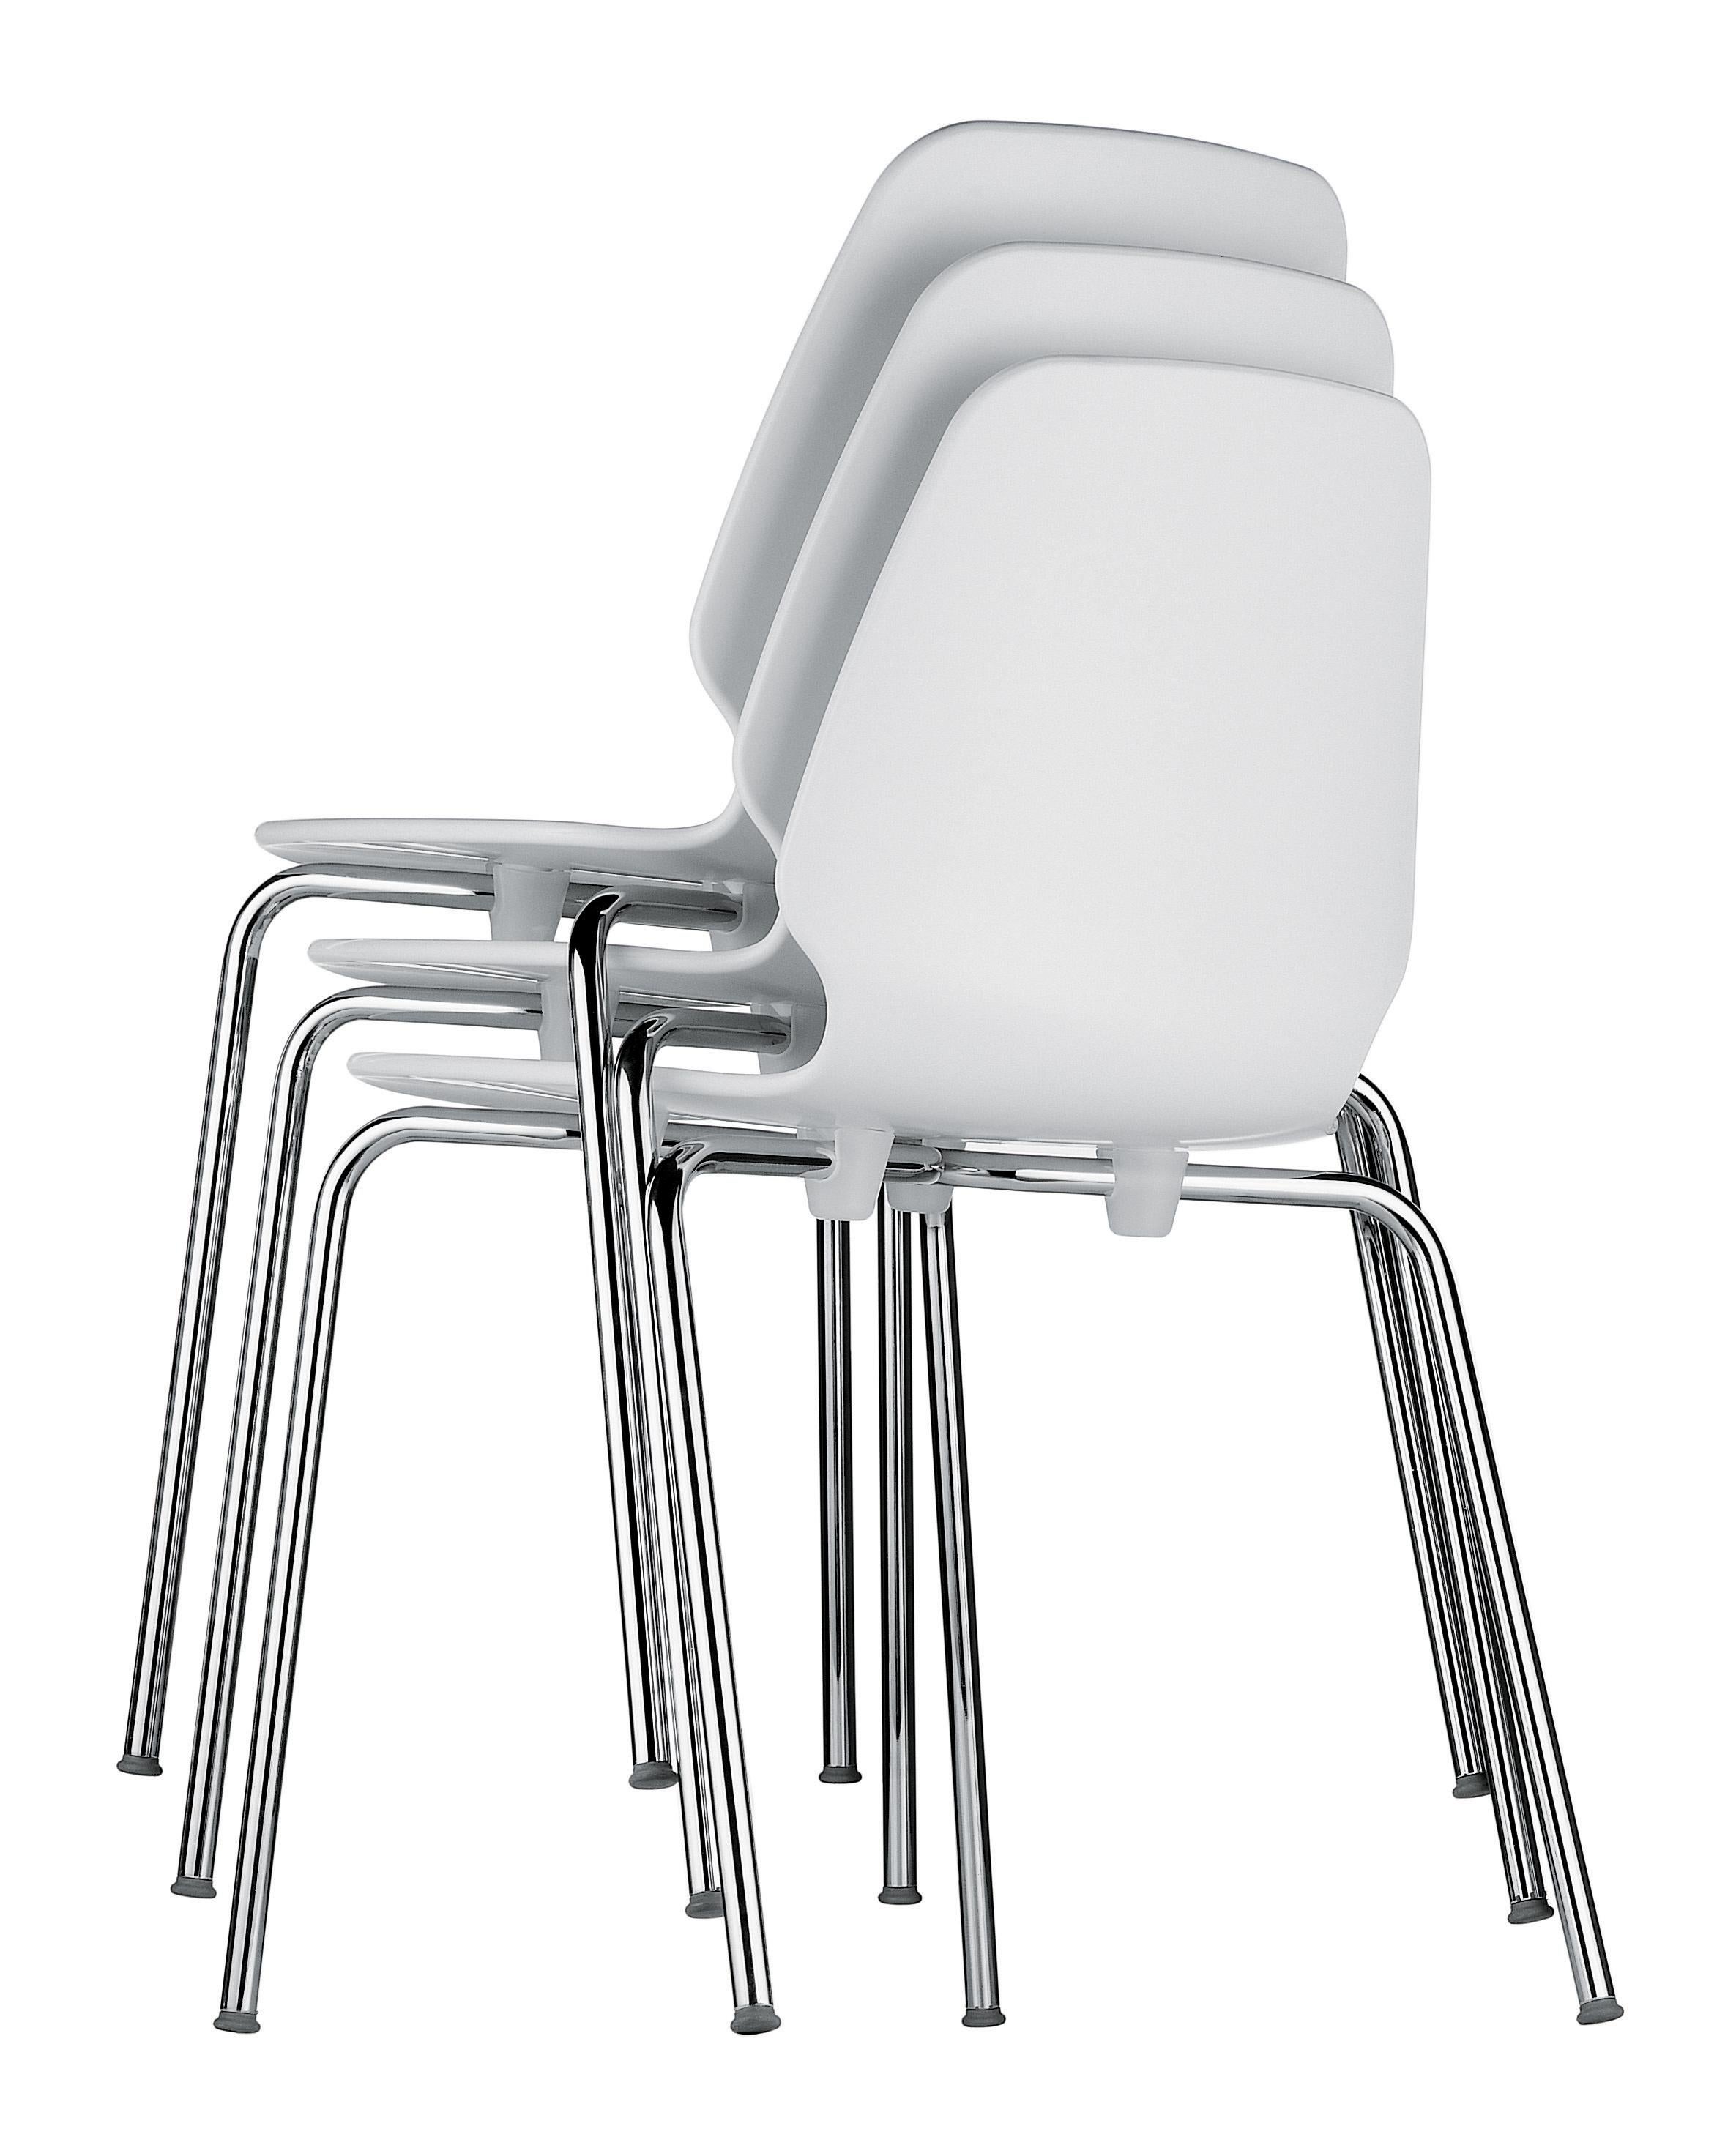 Alias 530 Selinunte Chair in White and Chromed Steel Frame by Alfredo Häberli In New Condition For Sale In Brooklyn, NY